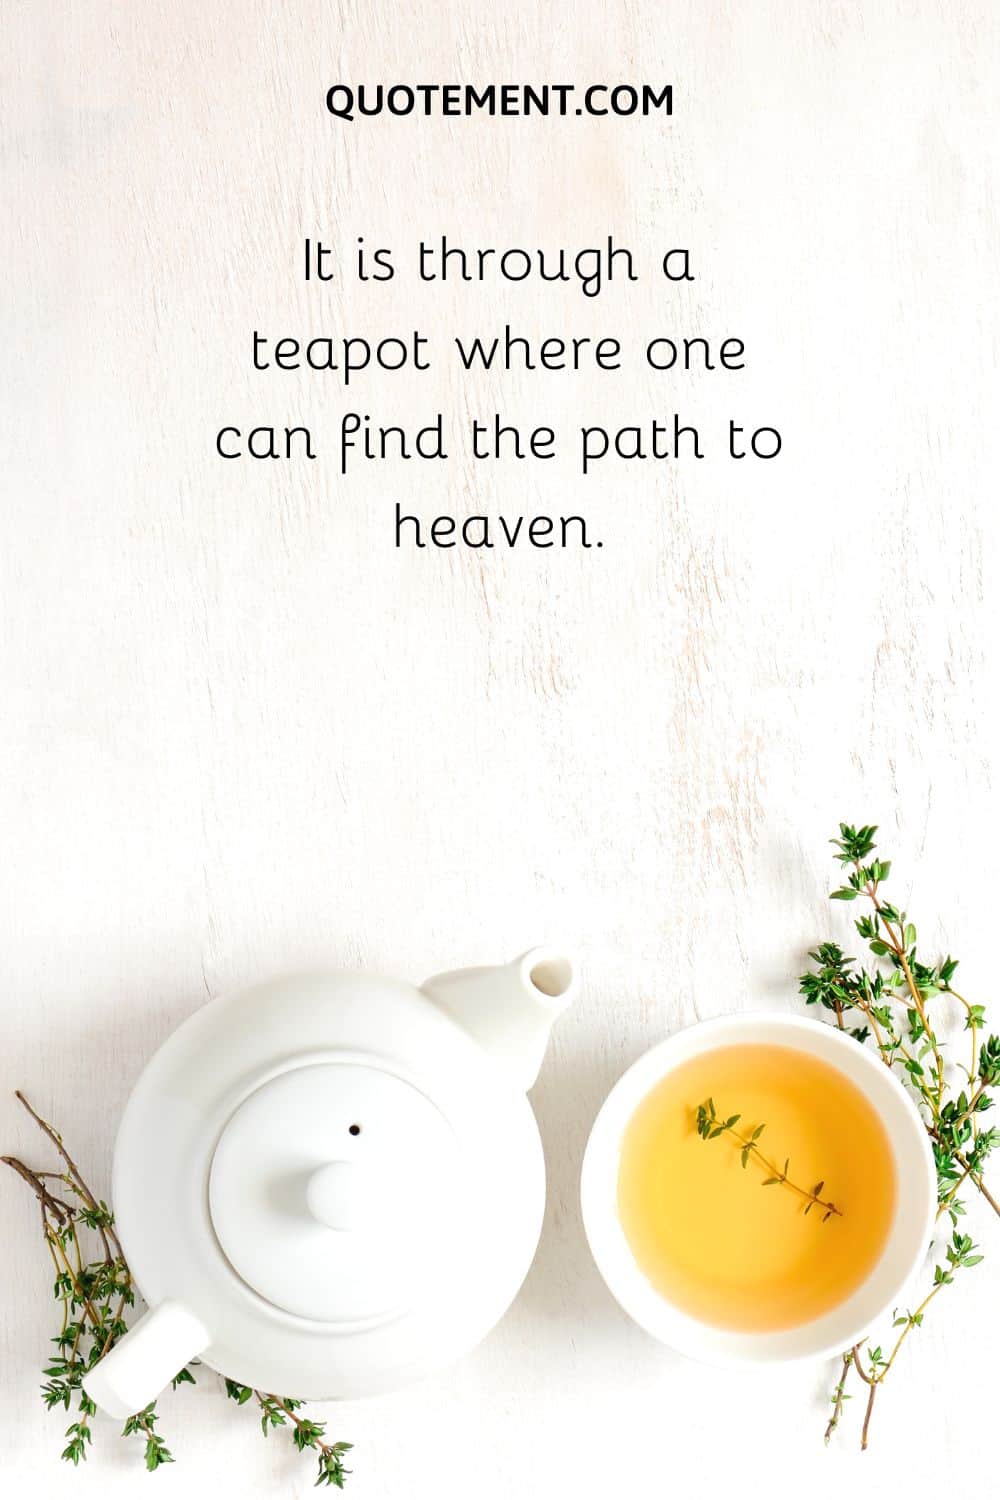 It is through a teapot where one can find the path to heaven.